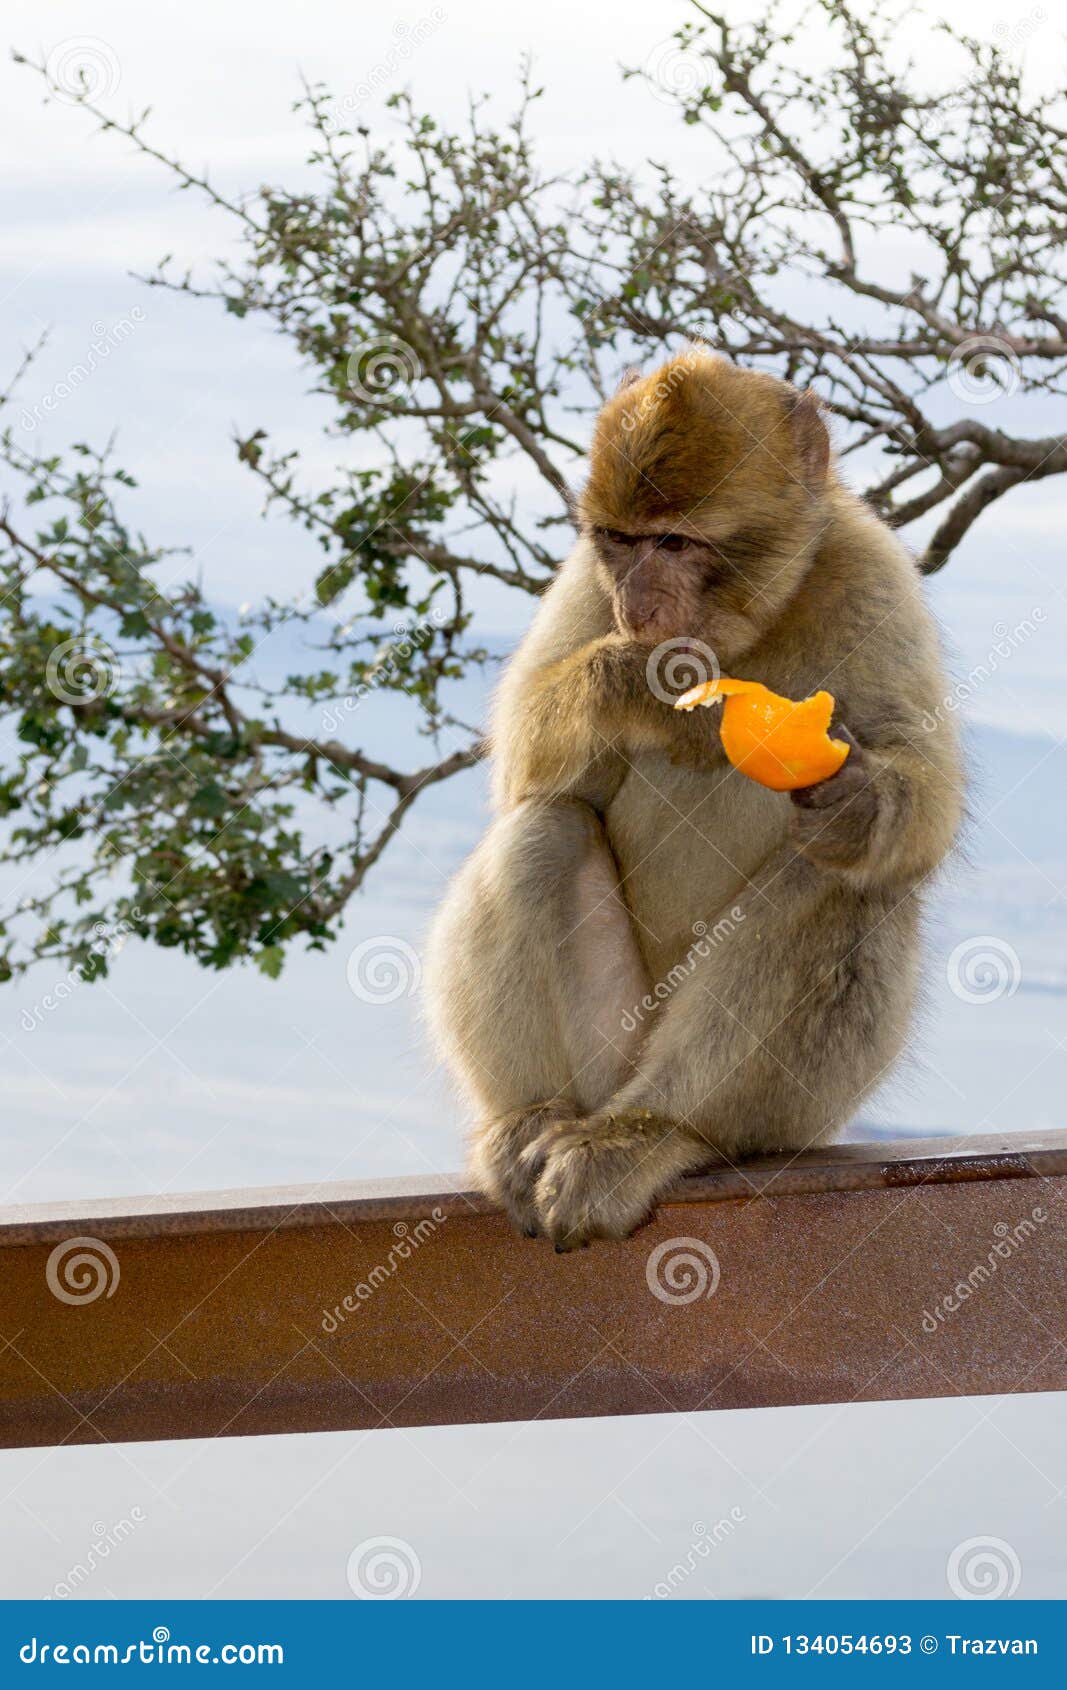 barbary macaque monkey in gibraltar